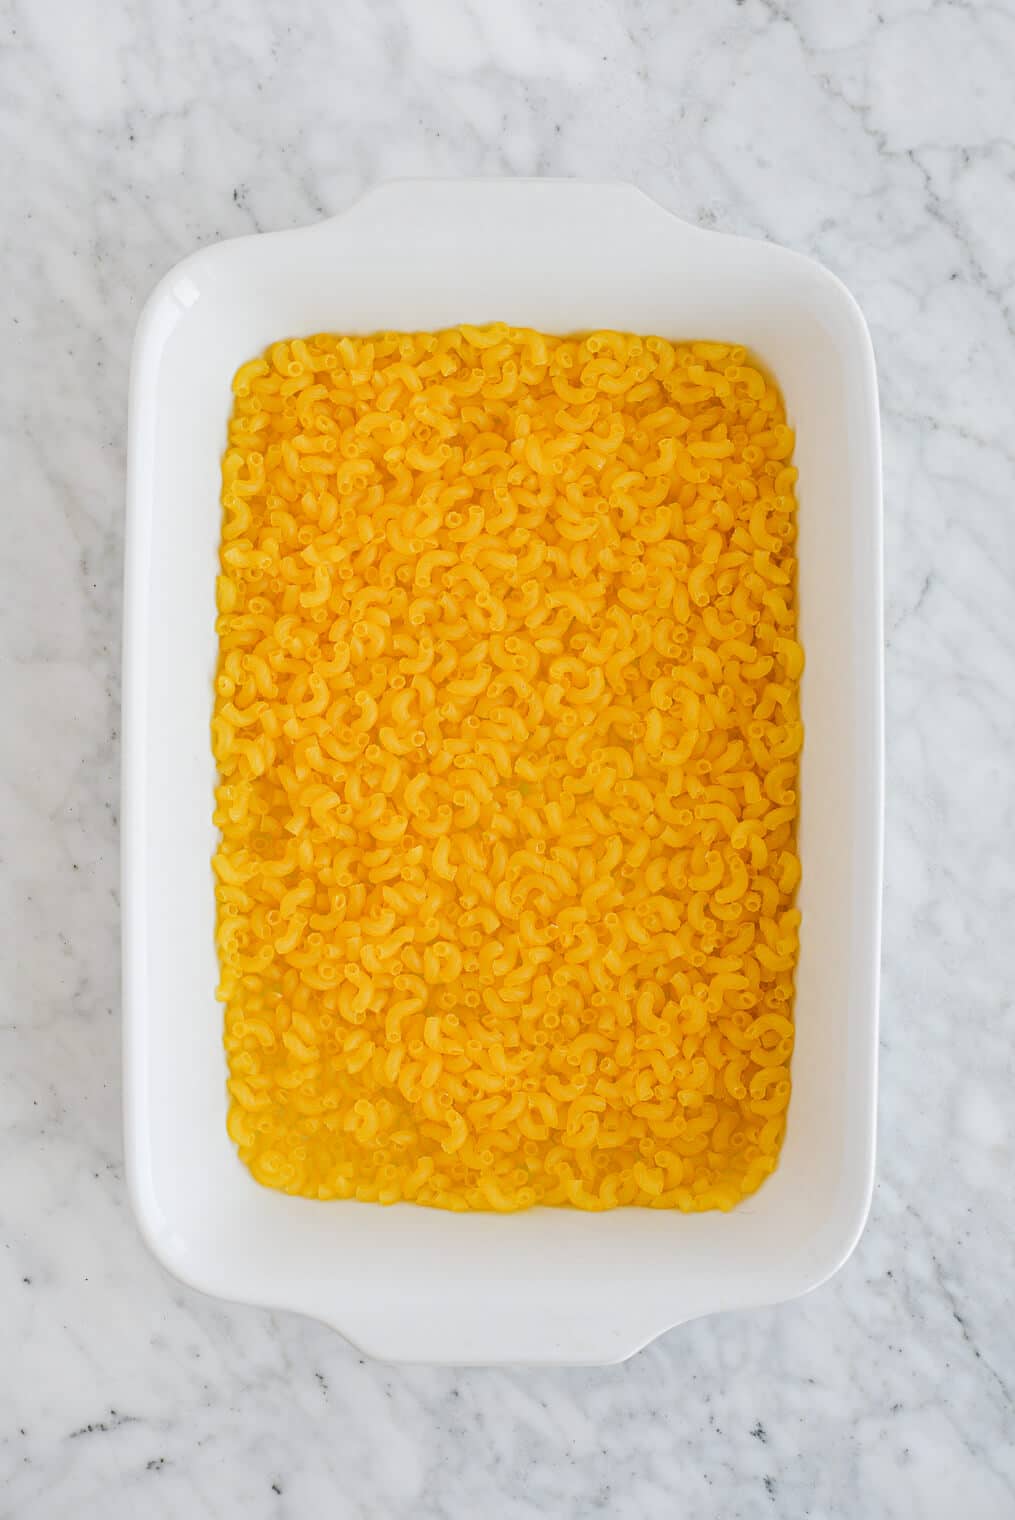 the top view of a casserole dish filled with uncooked macaroni noodles sitting on a marble surface